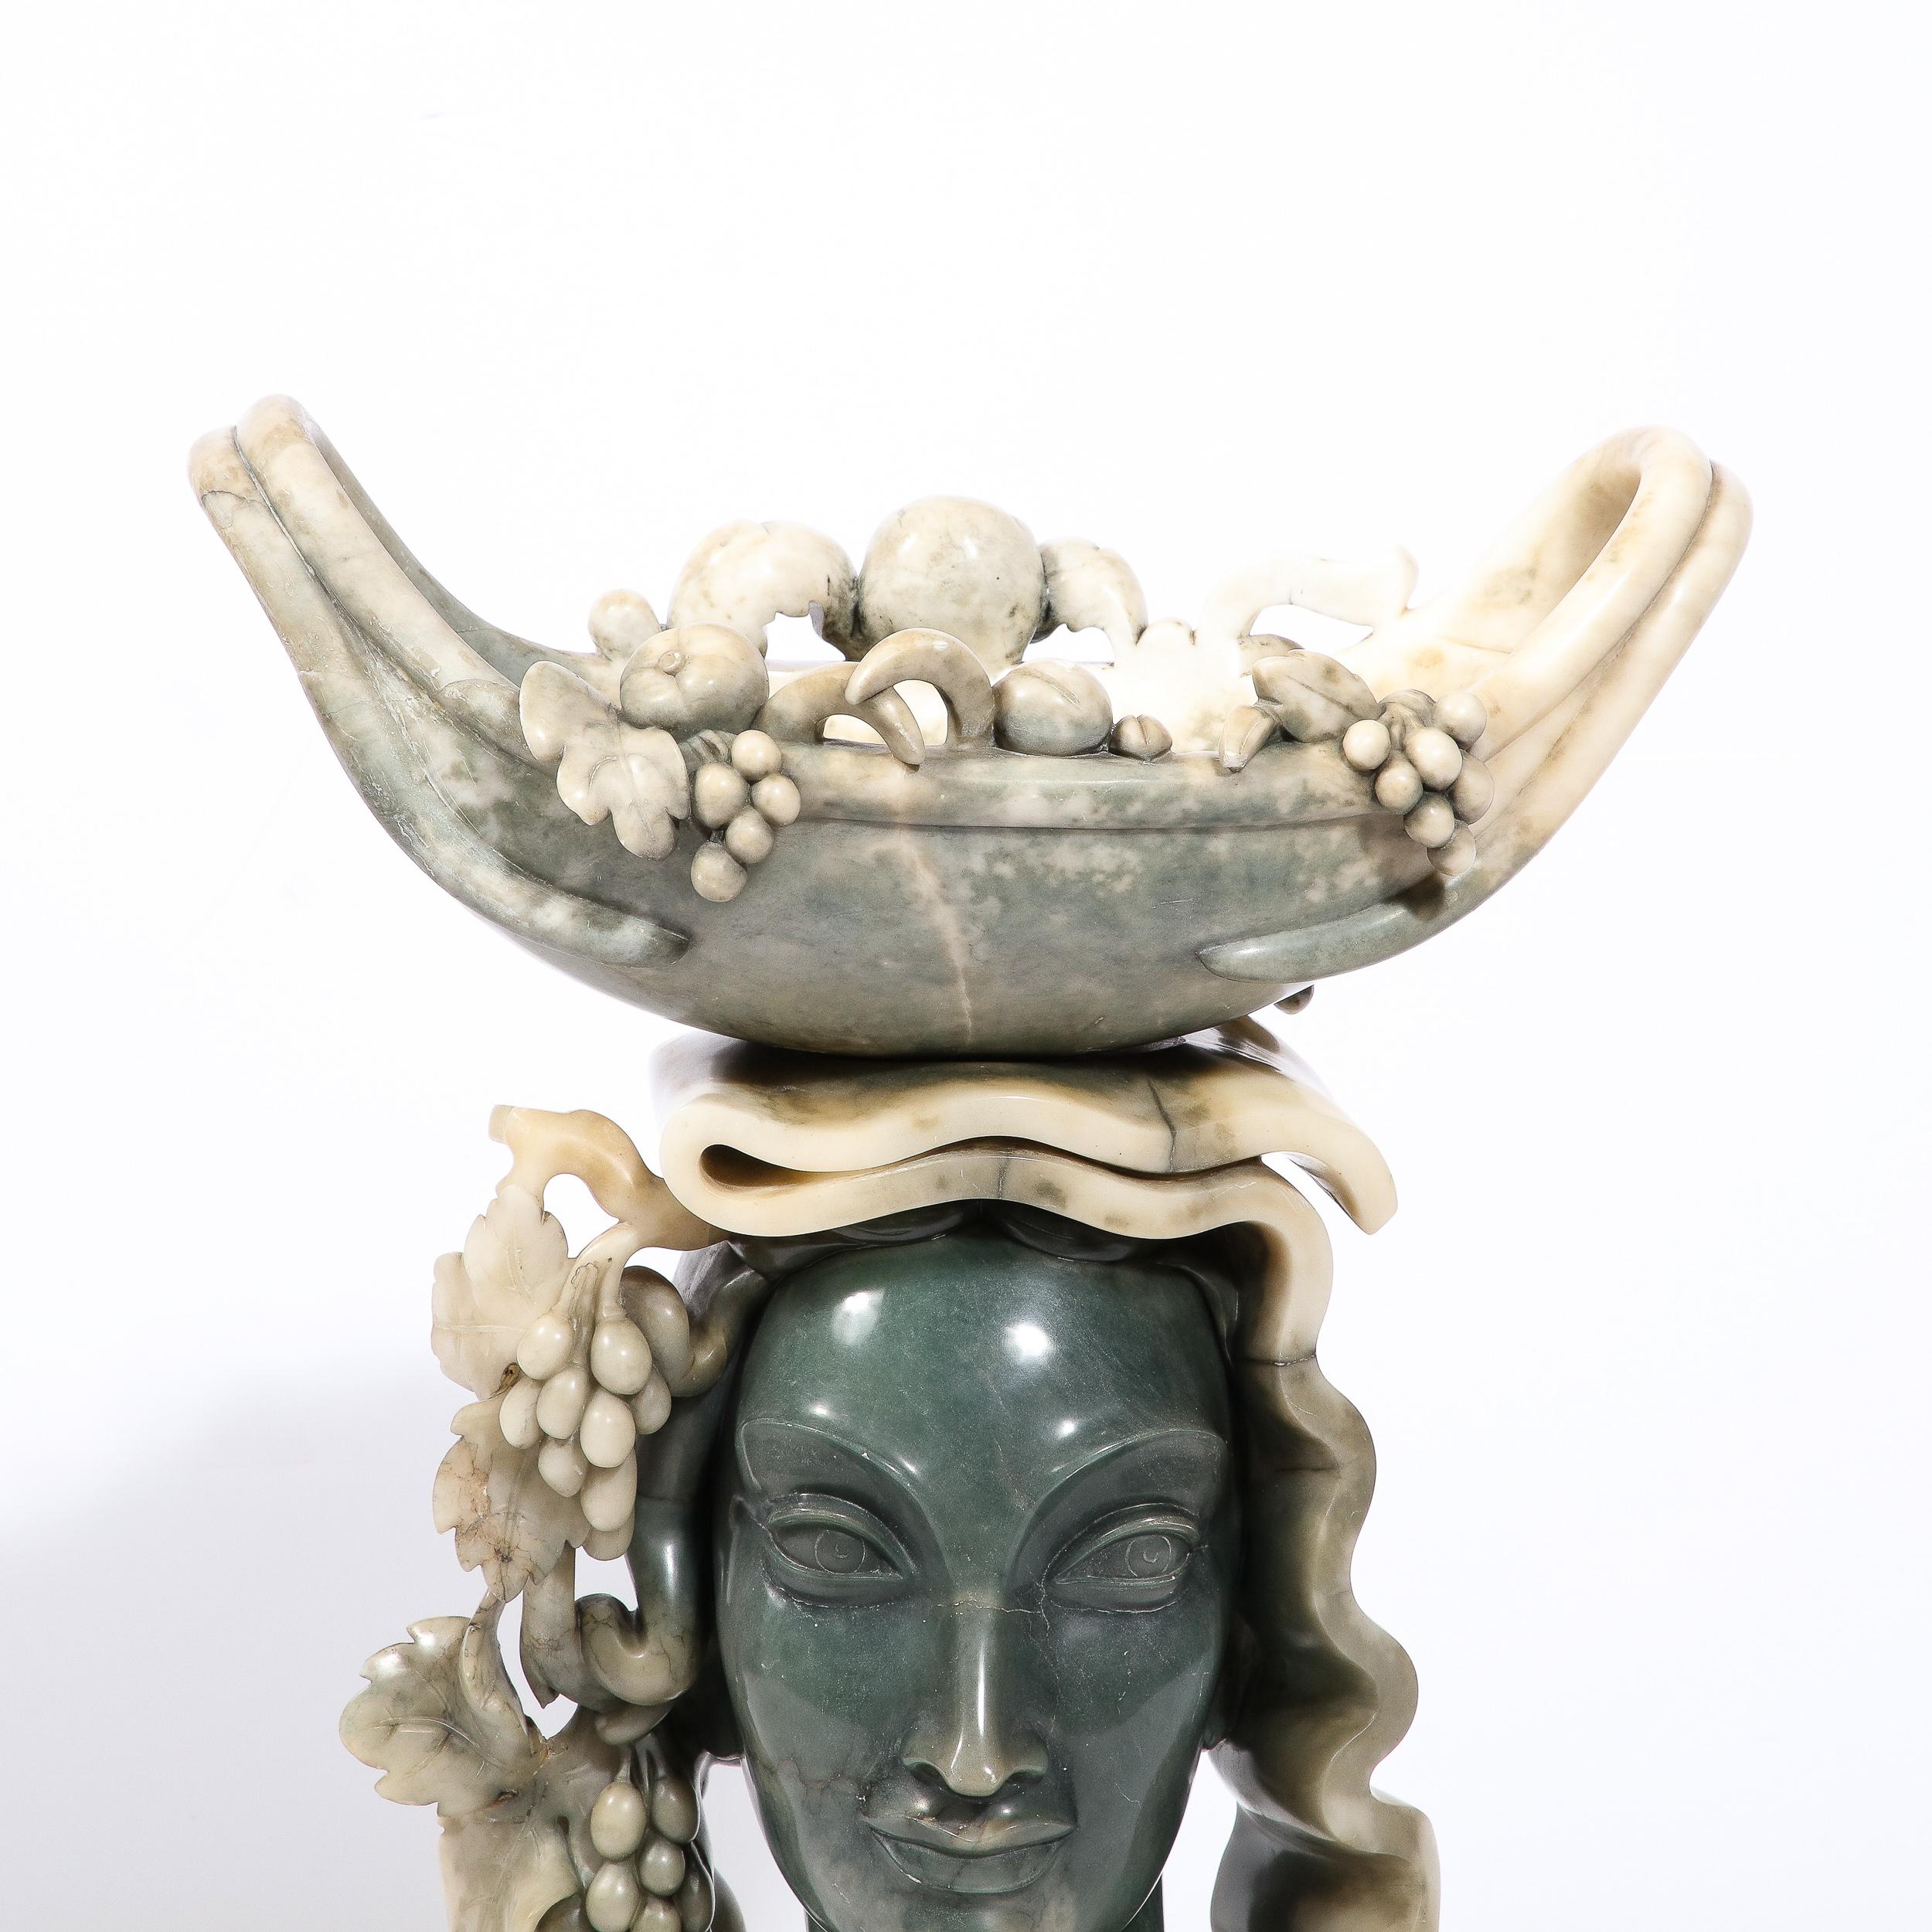 This magnificent Art Deco figurative sculpture was realized in Italy, circa 1948. Carved in sumptuous green alabaster the bust offers a stylized depiction of a woman with Modigliani- esque eyes and refined, balanced features of classical greek